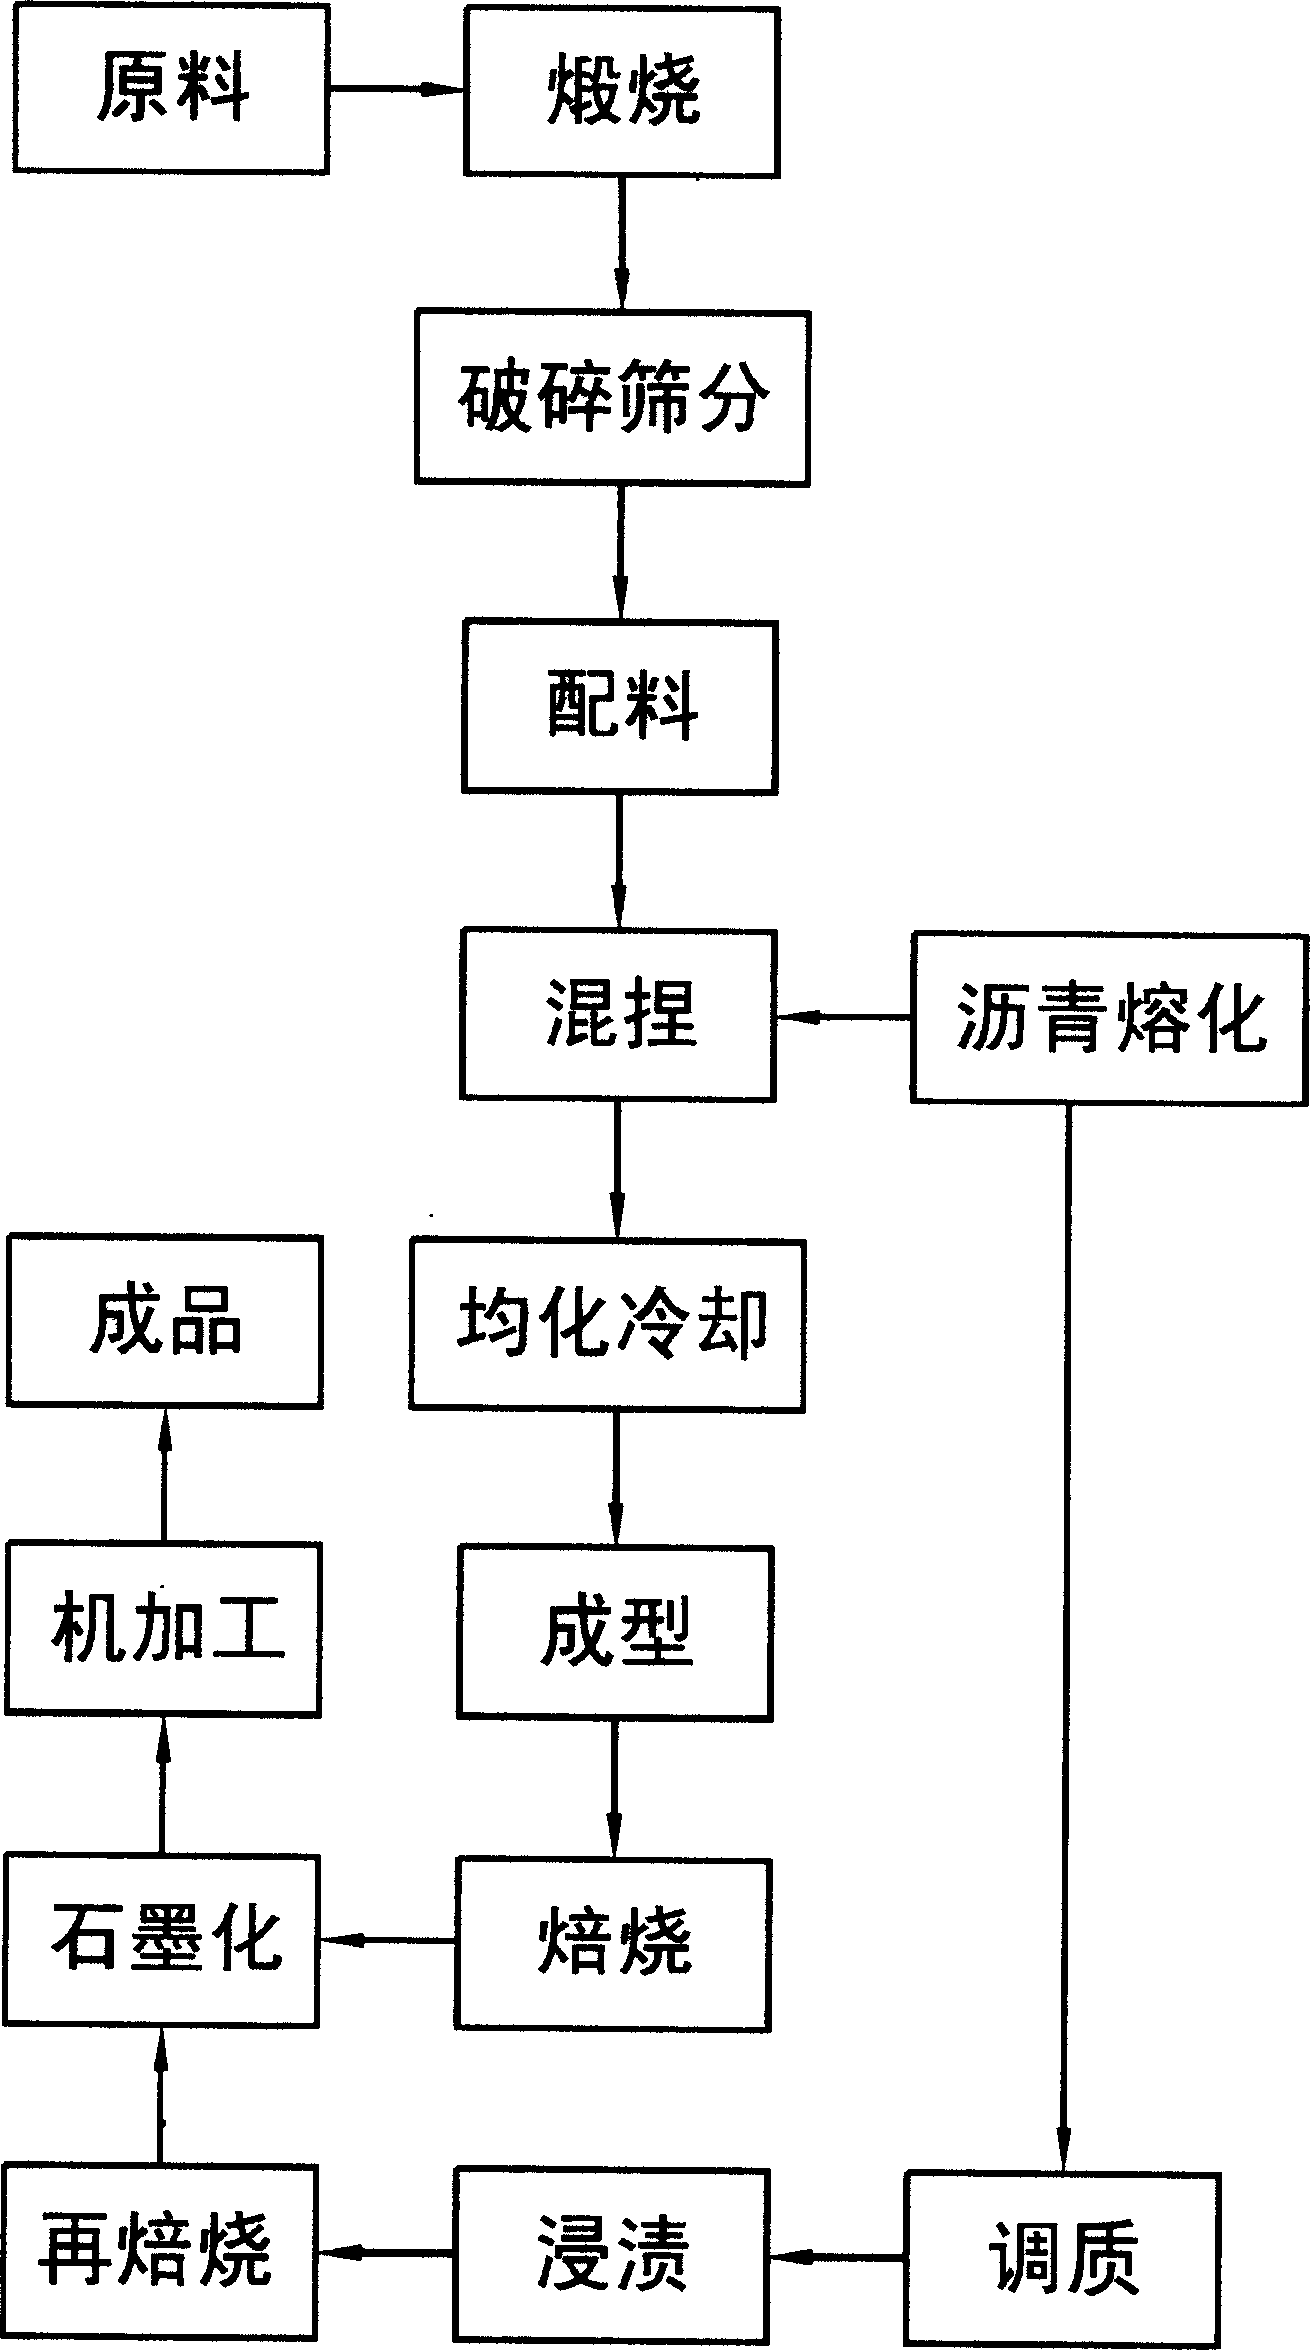 Production process for graphitized cathode